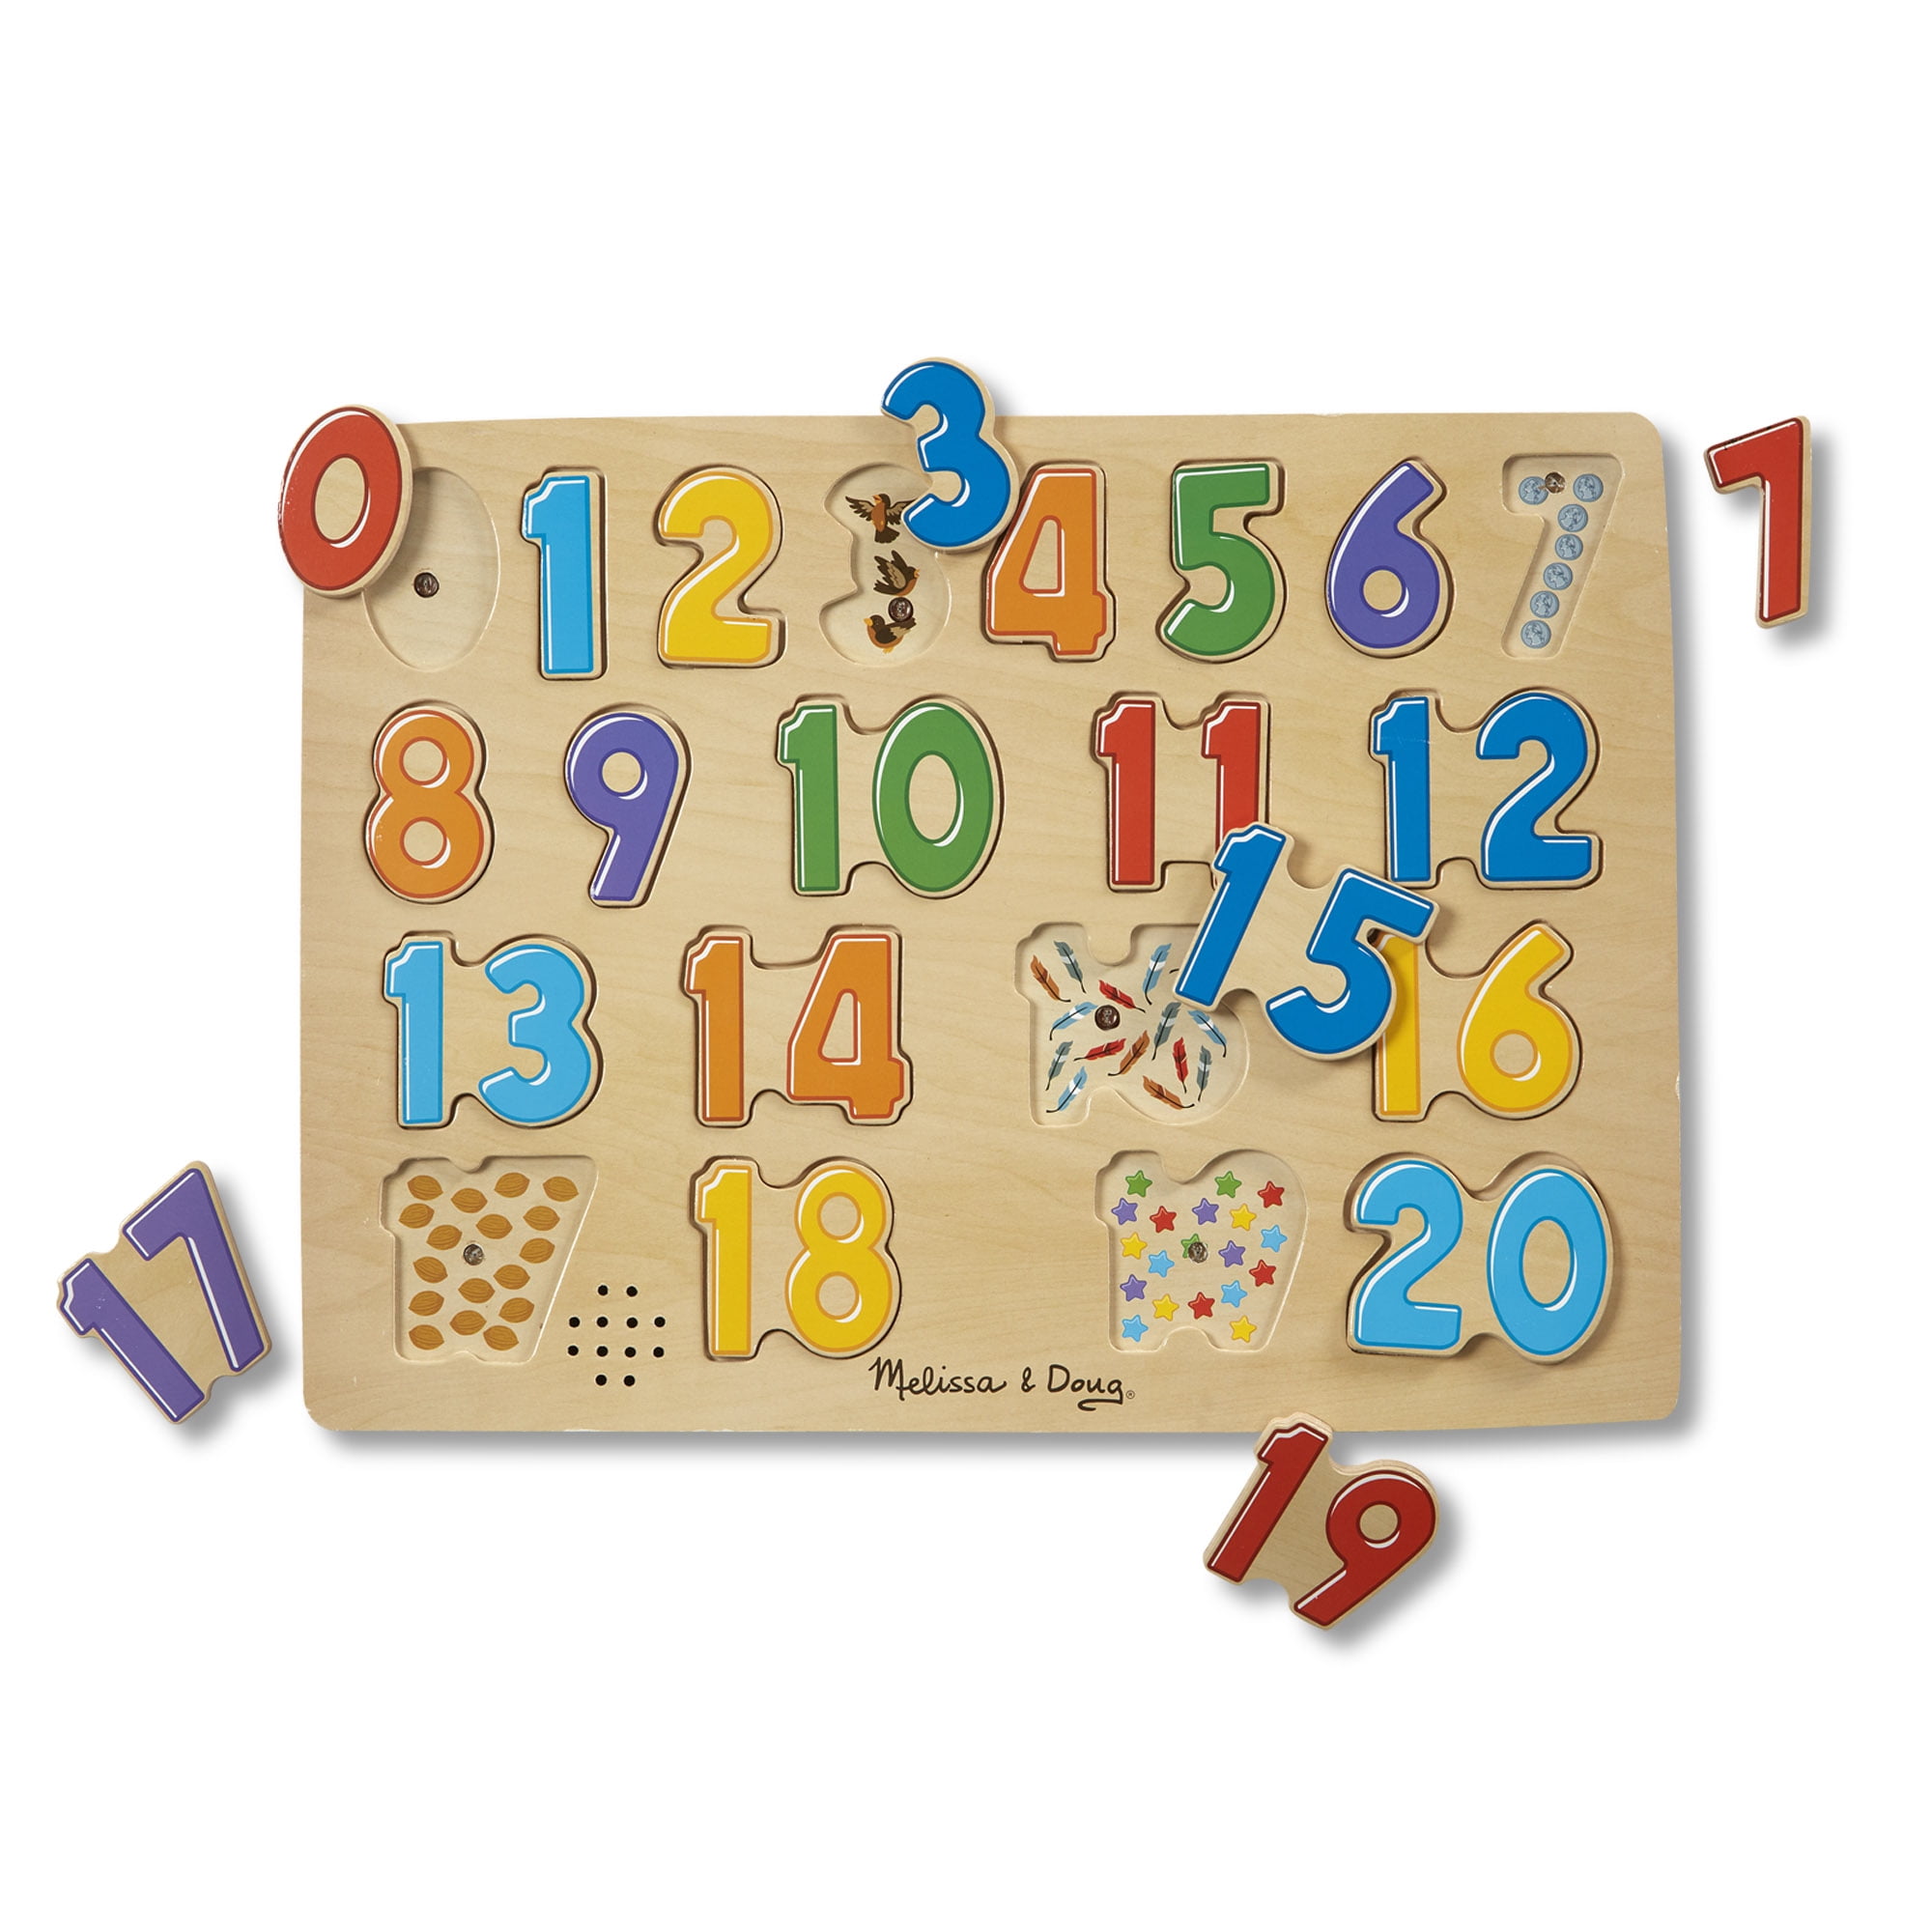 Imagination Generation Professor Poplar’s Wooden Numbers Puzzle Board Learn to Count with Colorful Chunky Numbers SG_B0161IWROG_US